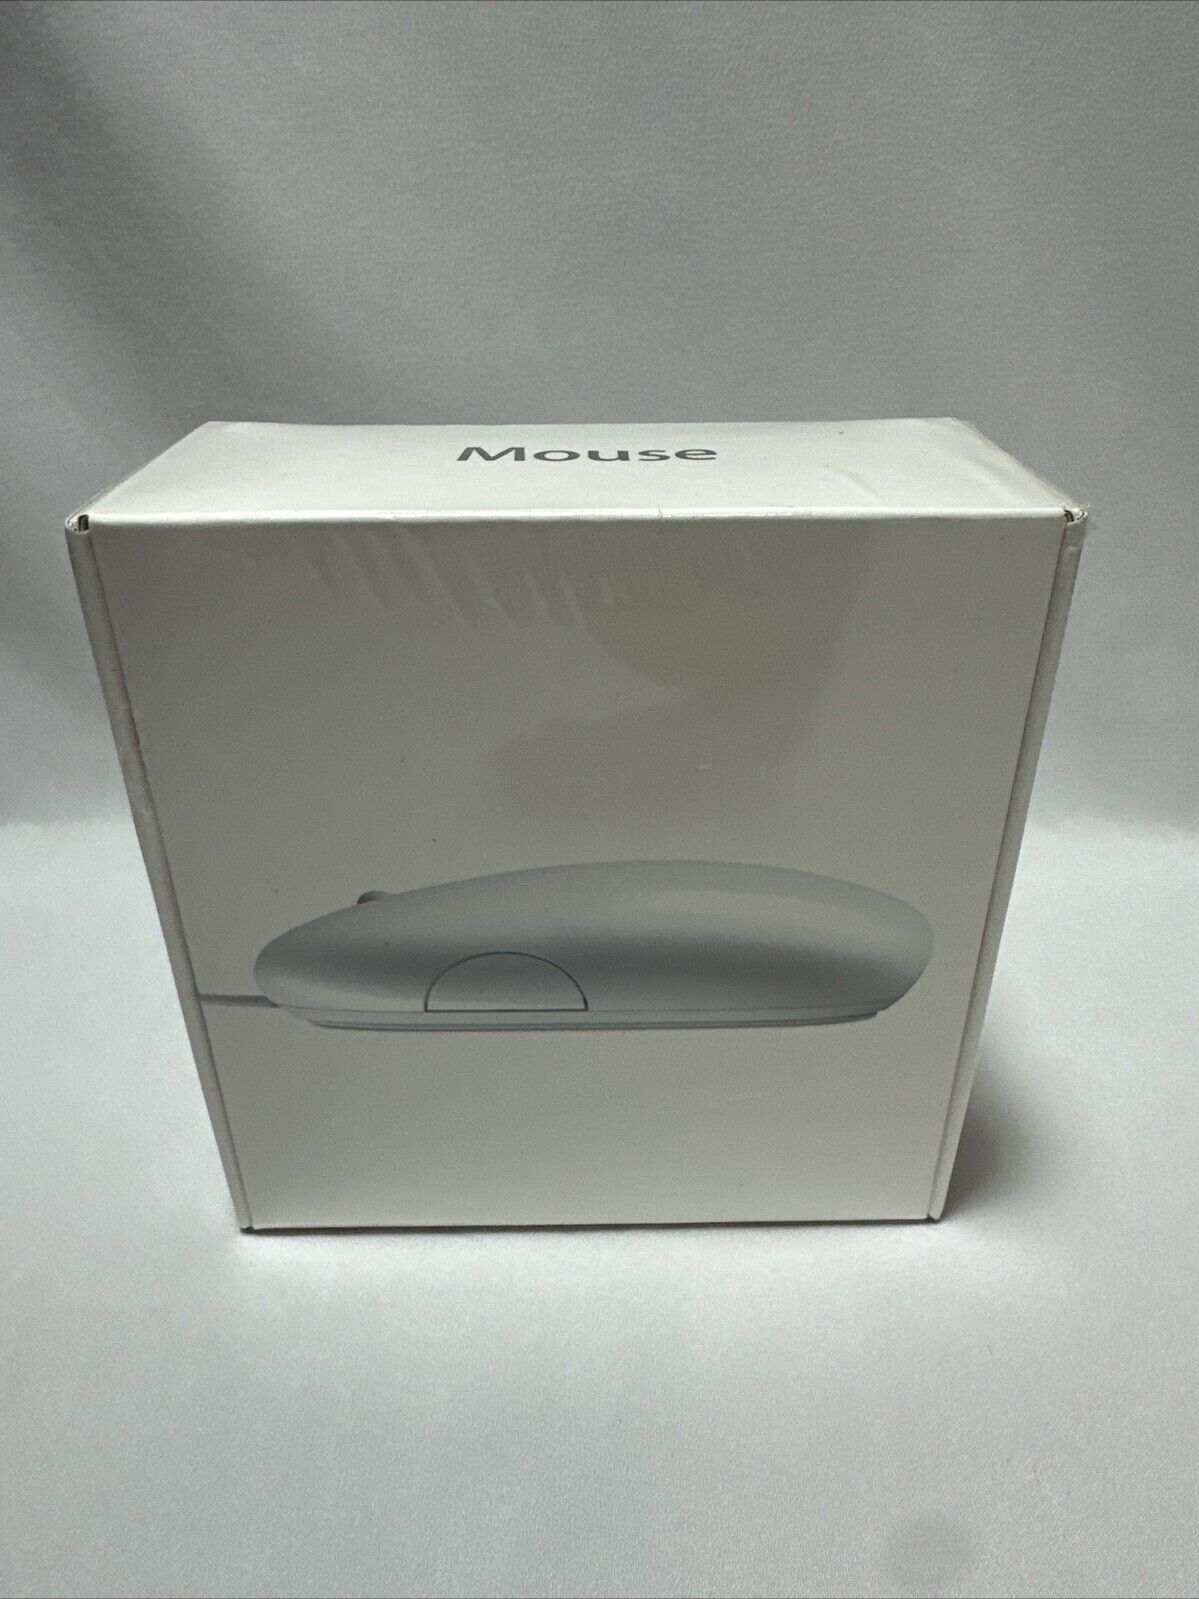 NEW Sealed Apple Mighty Mouse A1152 USB Wired Optical Mouse MB112LL/B